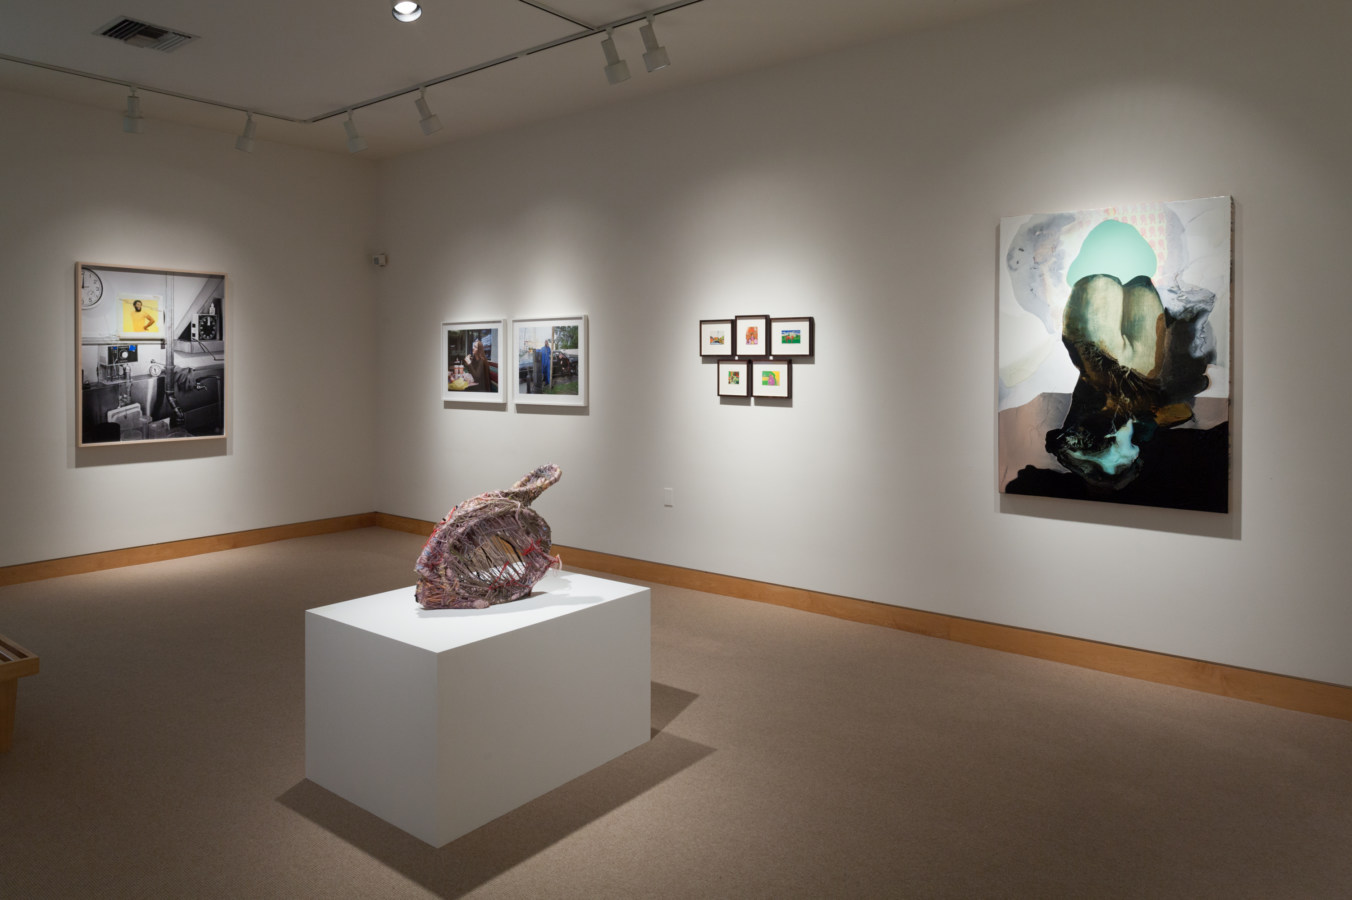 Color image of exhibition depicting artworks both framed and sculptural within gallery